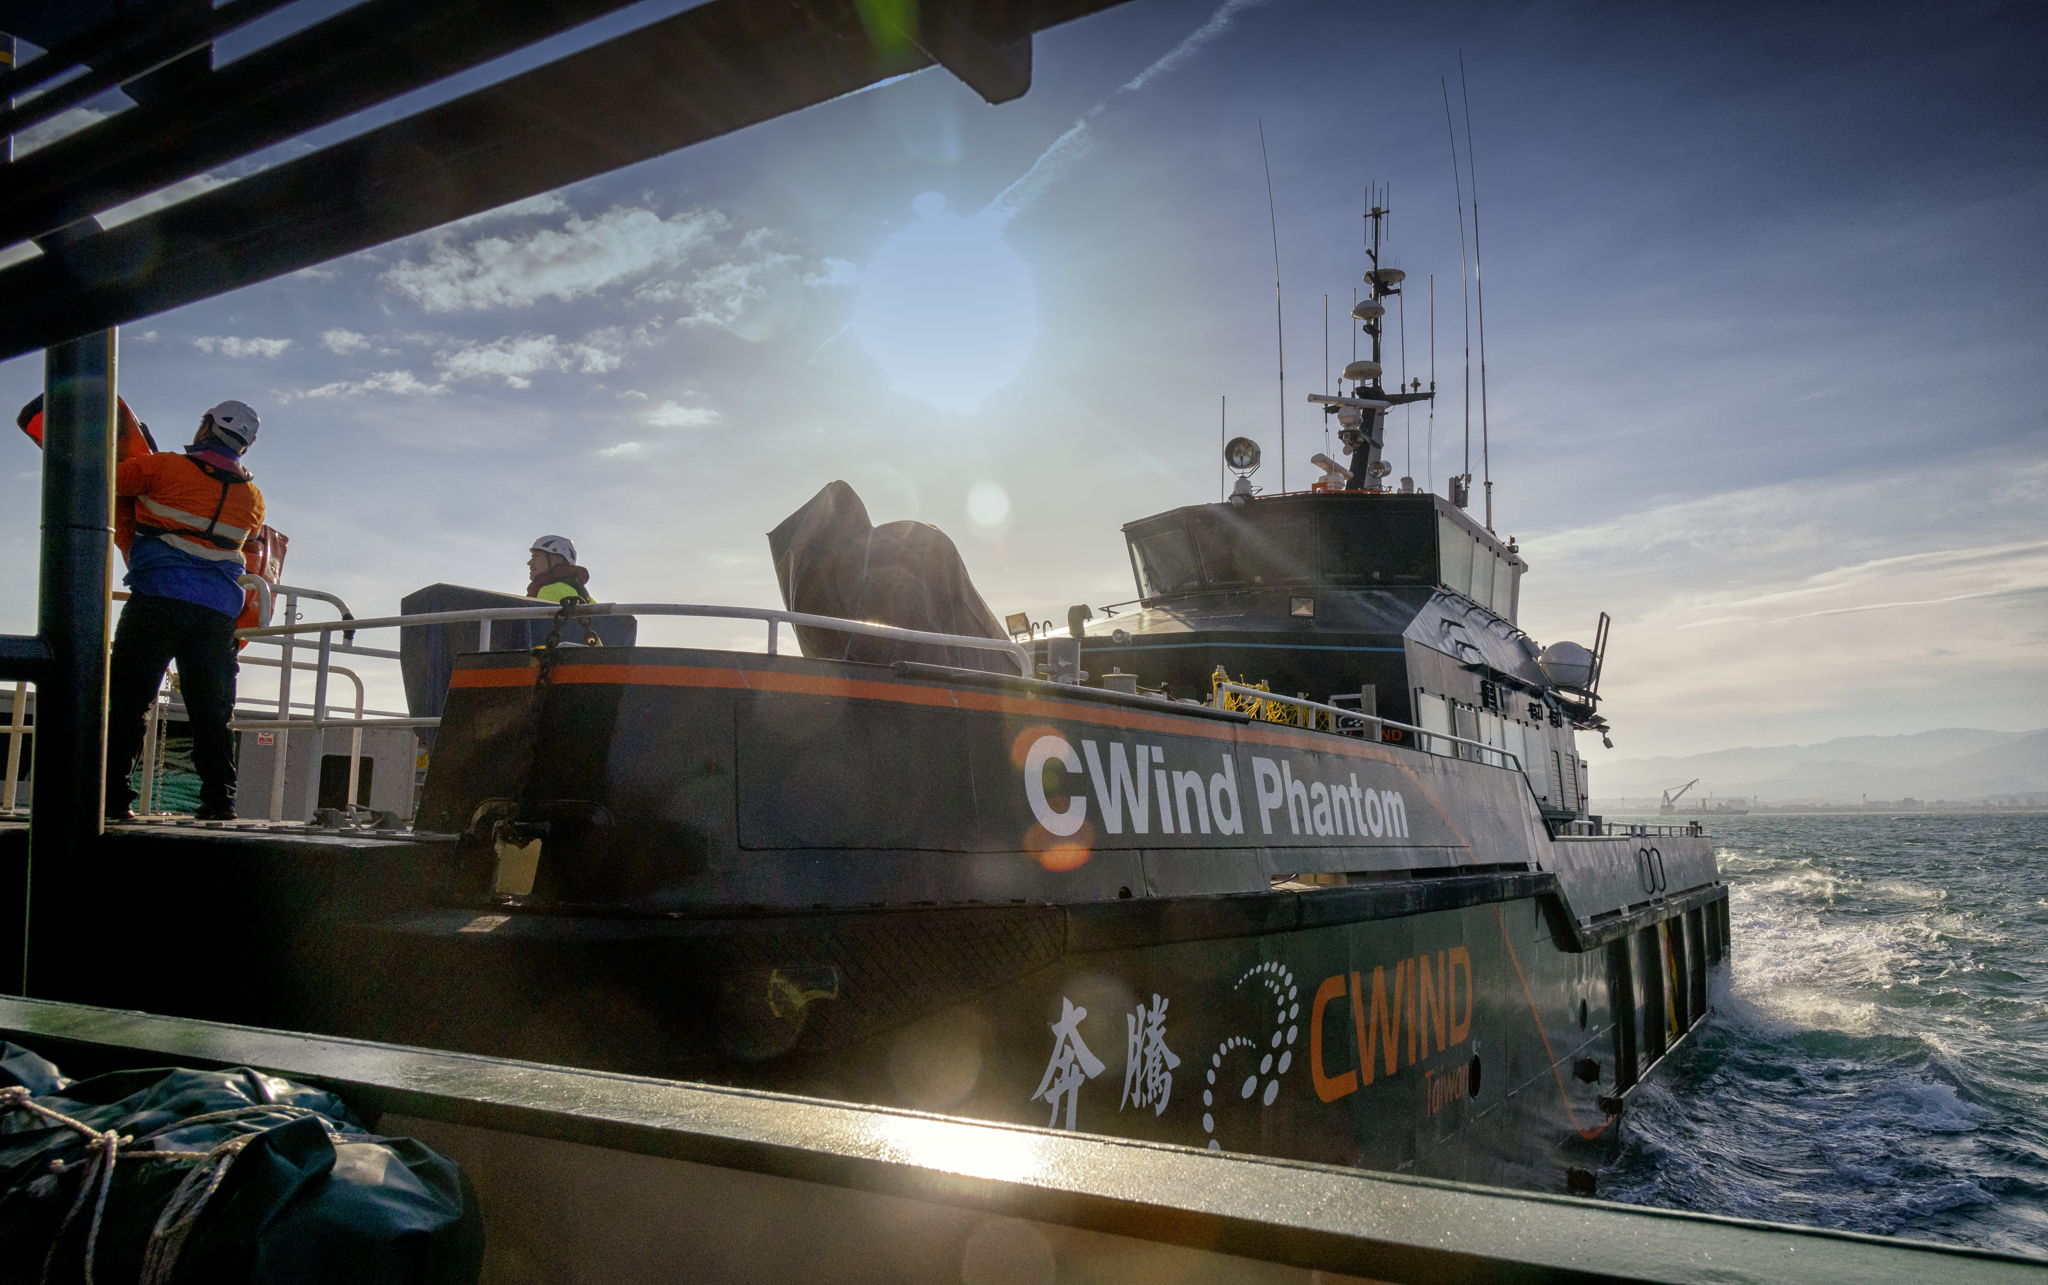 CWind Phantom at sea with crew on board